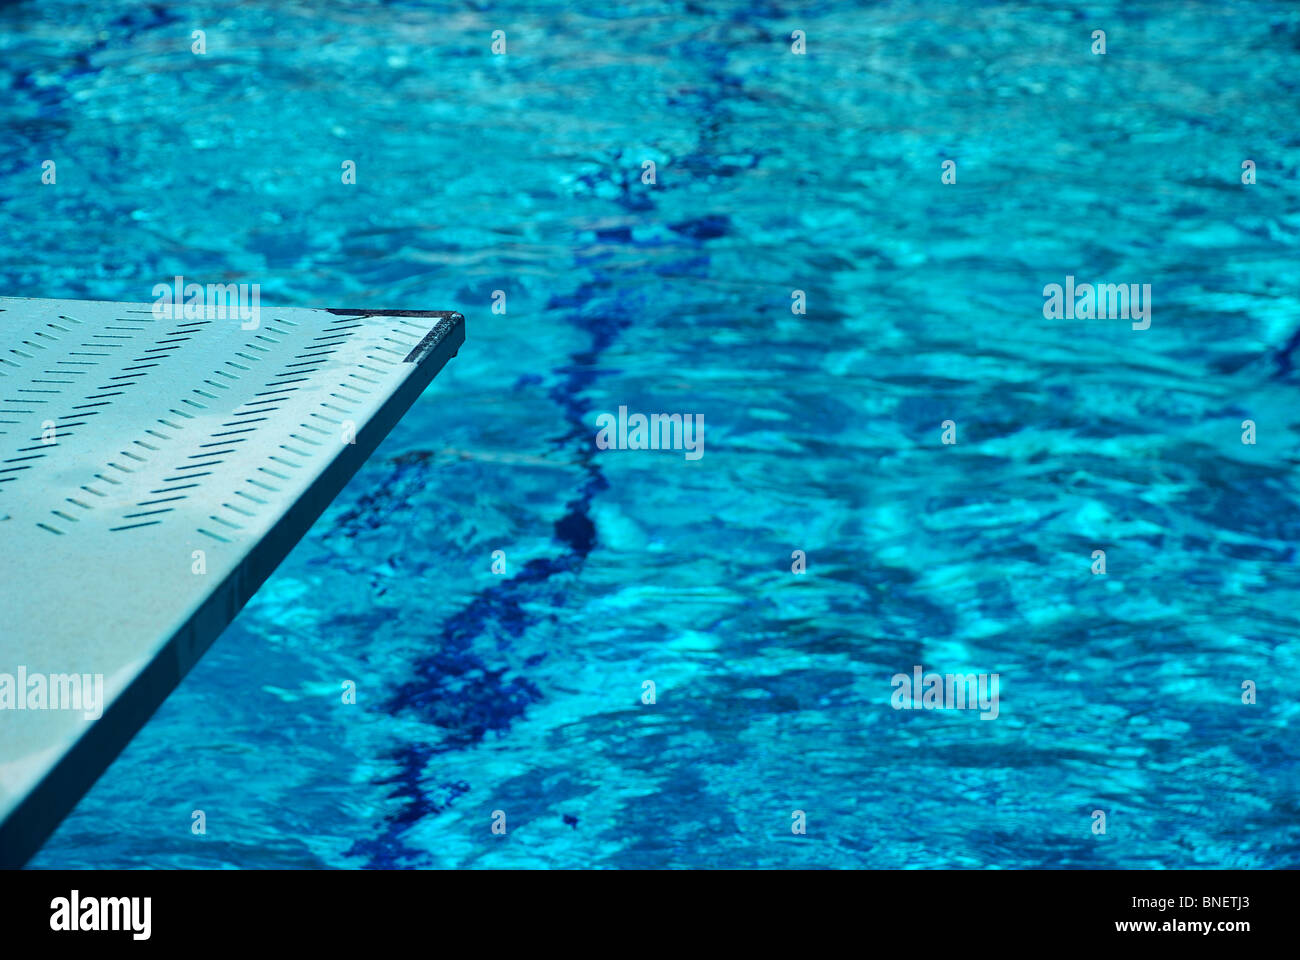 Diving board and swimming pool Stock Photo